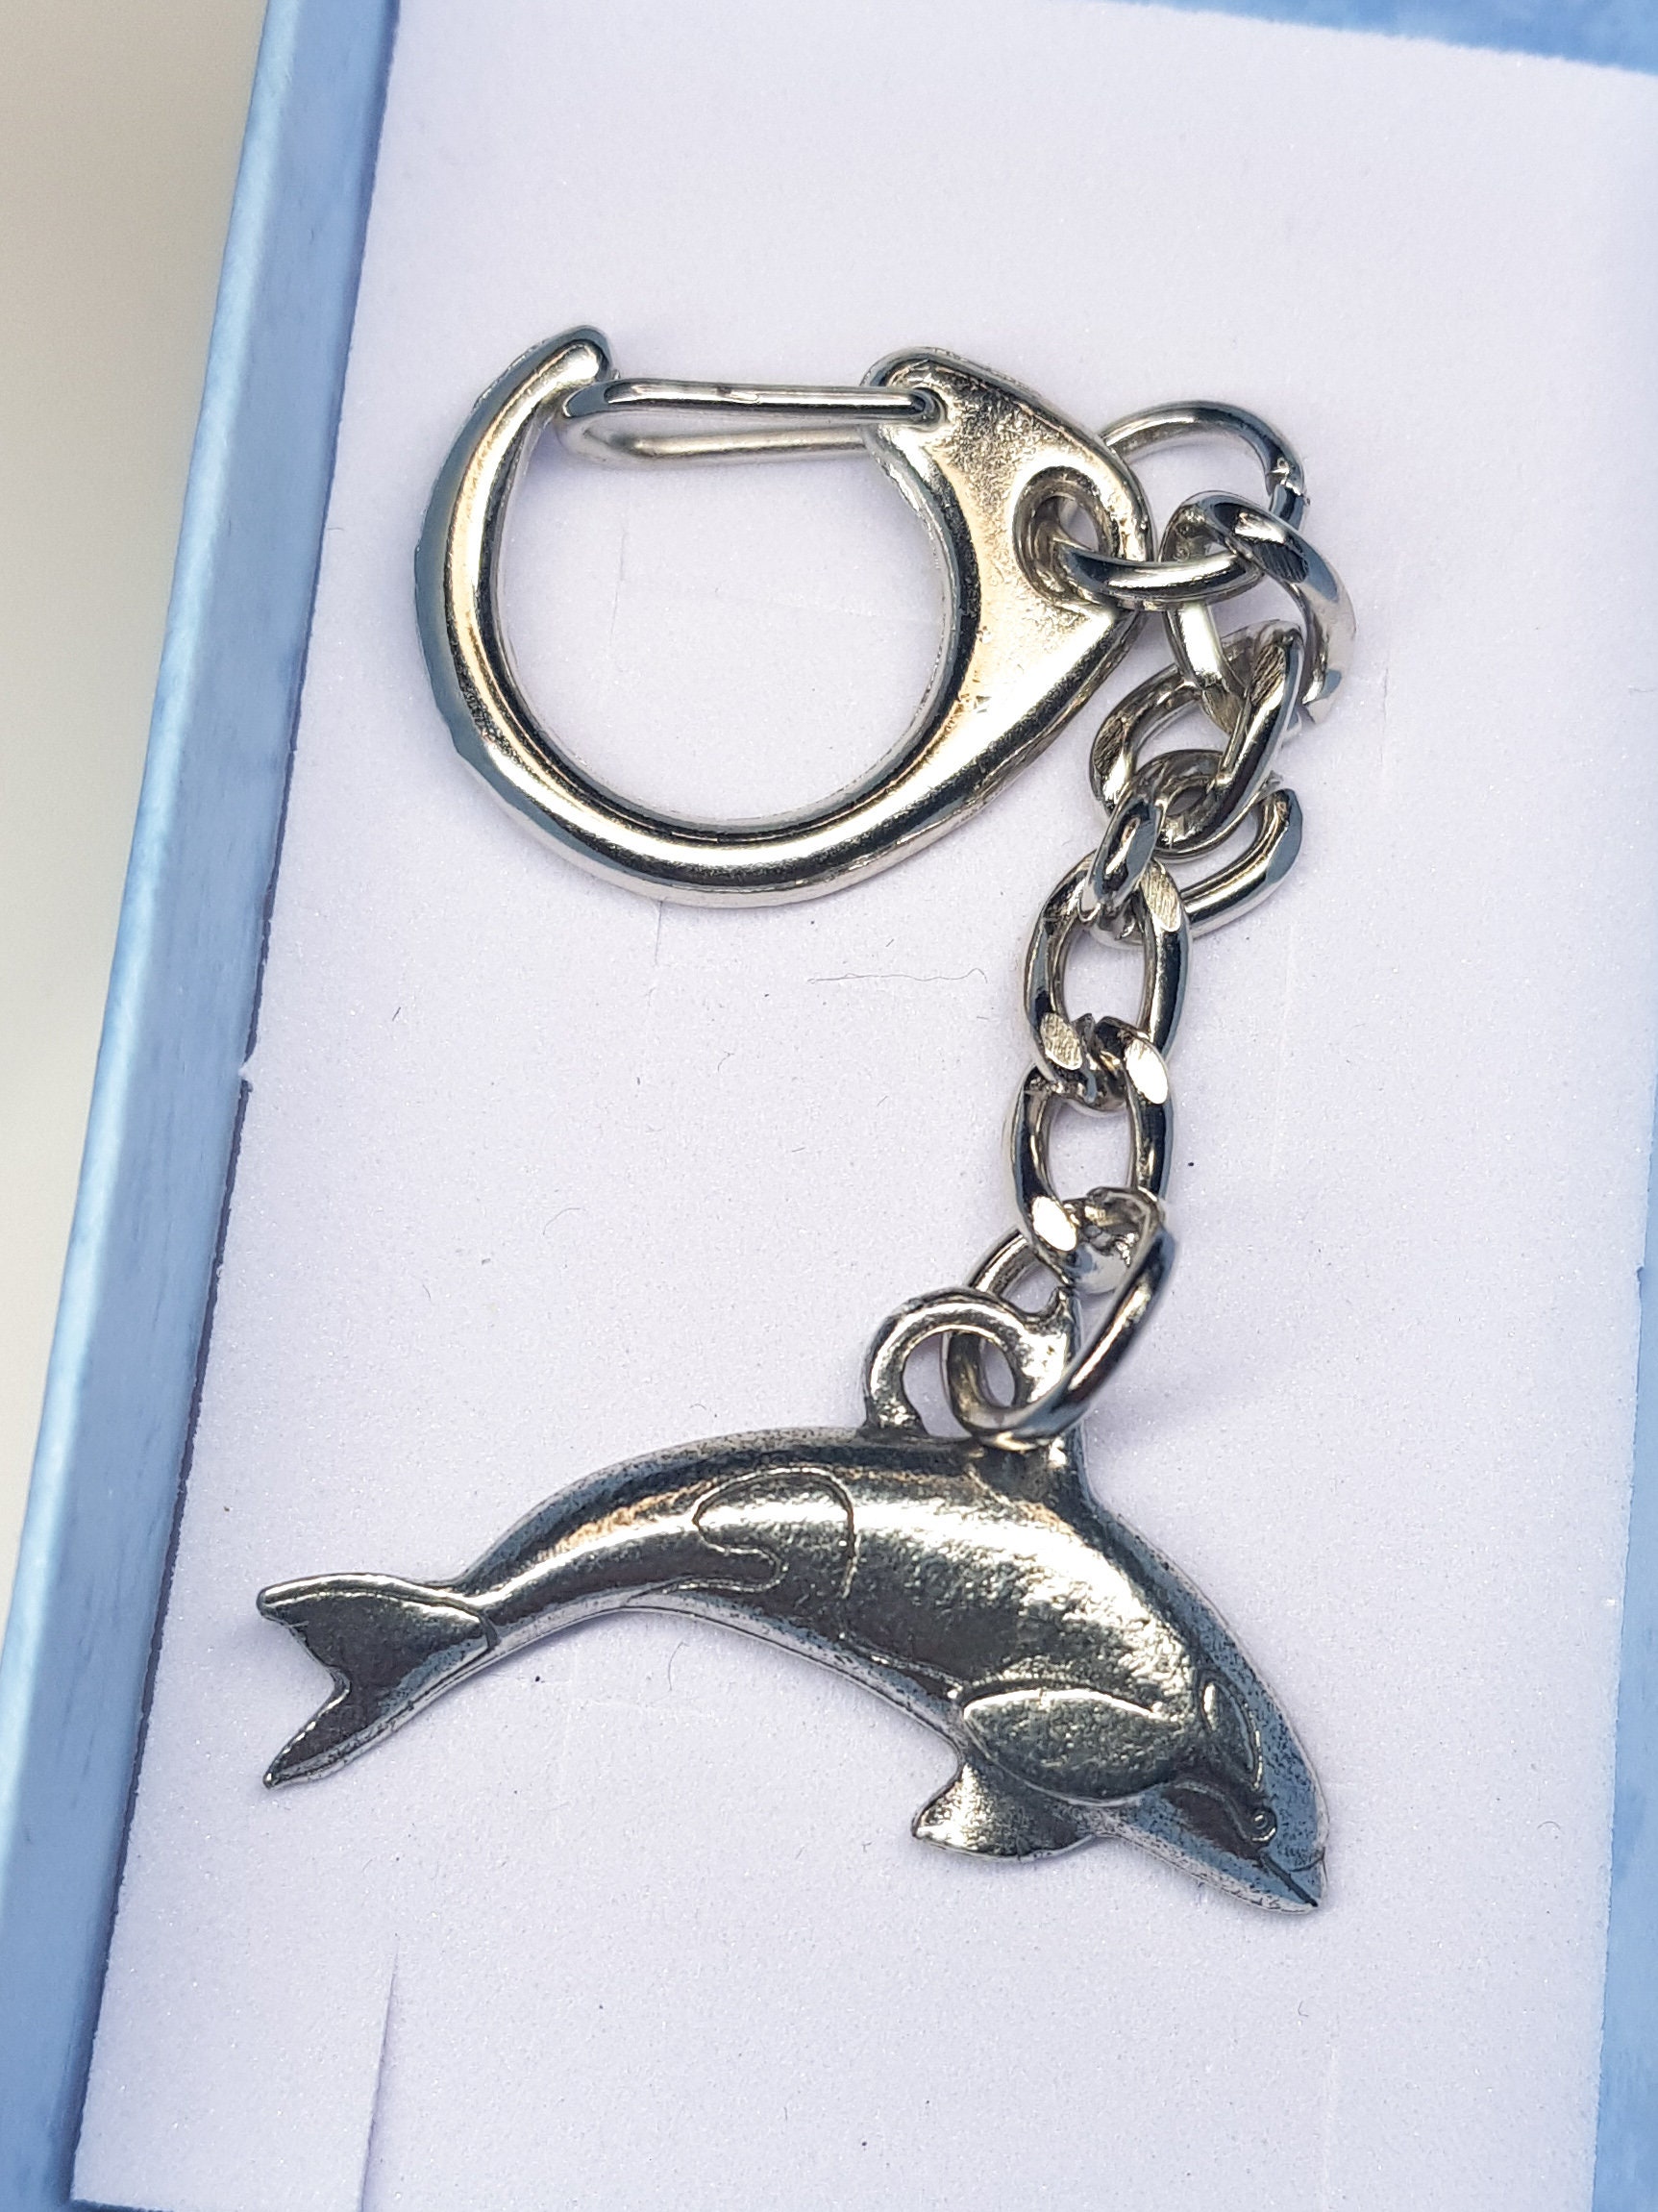 Orca Killer Whale KeyRing Hand Crafted Pewter Key Ring in pouch Gift Idea 40mm 